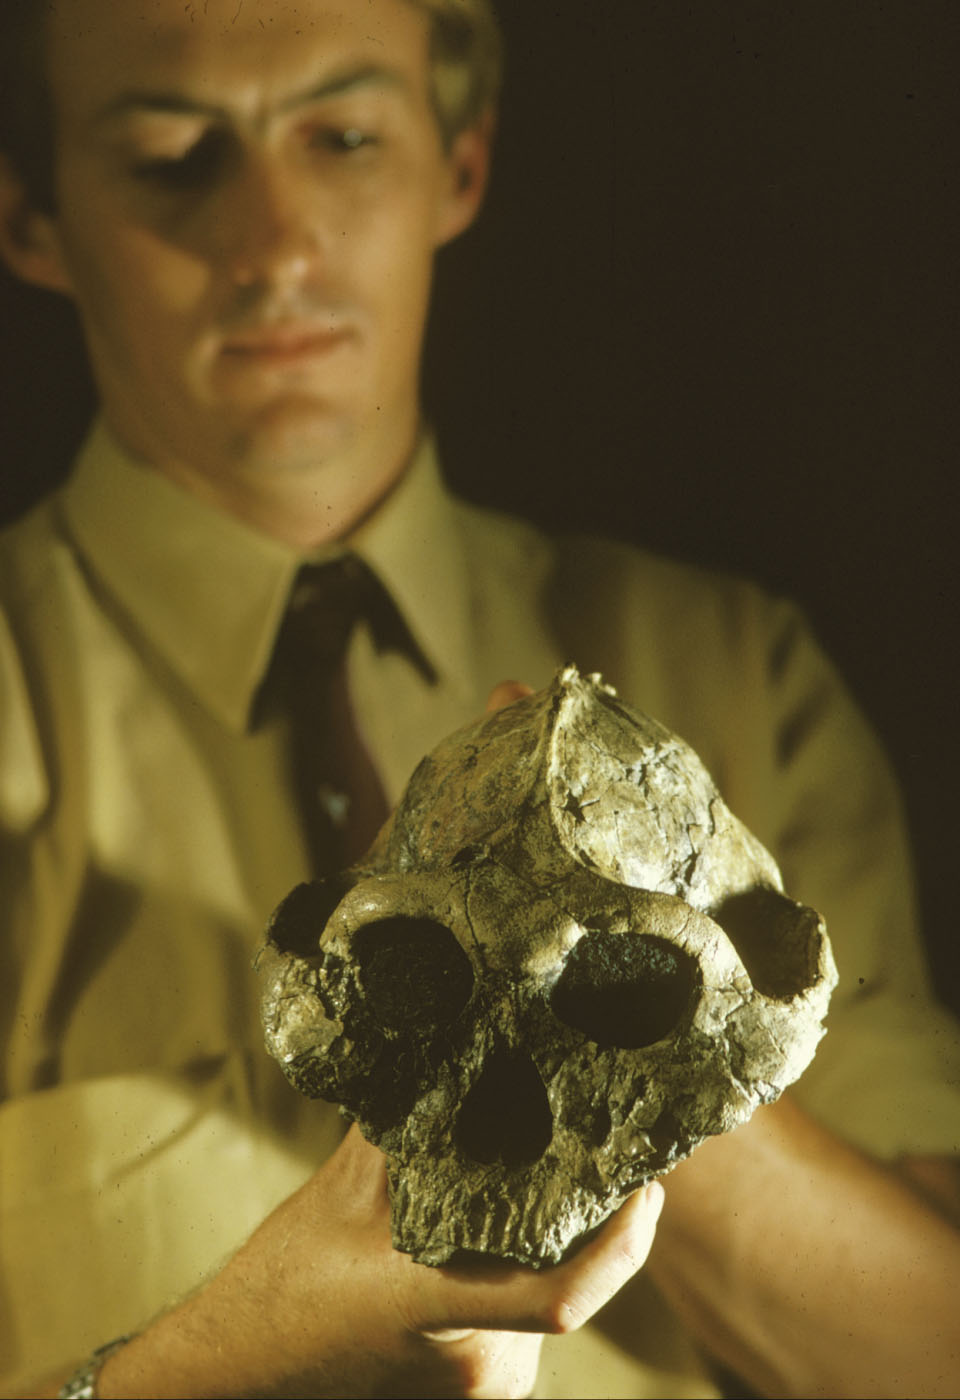 Paleoanthropologist Richard Leakey holds the skull of the hominid Australopithecus robustus, which he found in August 1969 at East Turkana, Kenya. The skull was dated at around 1.6 million years old. Photo courtesy of Turkana Basin Institute.